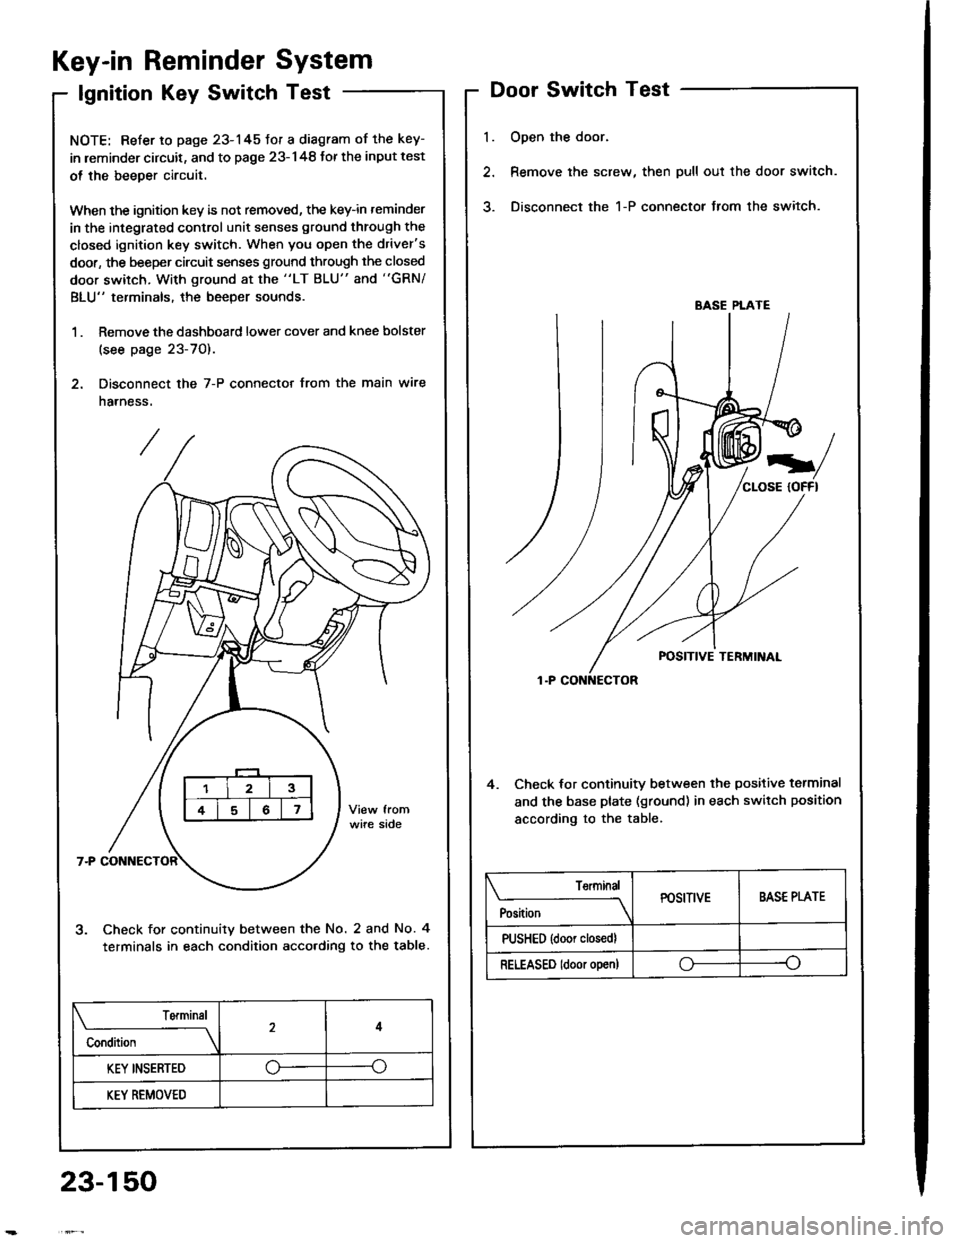 HONDA INTEGRA 1994 4.G Service Manual Key-in Reminder System
lgnition Key Switch Test
NOTE: Refer to page 23-145fot a diagram of the key-
in leminder circuit, and to page 23-148 Jor the input test
ol the beeper circuit.
When the ignition 